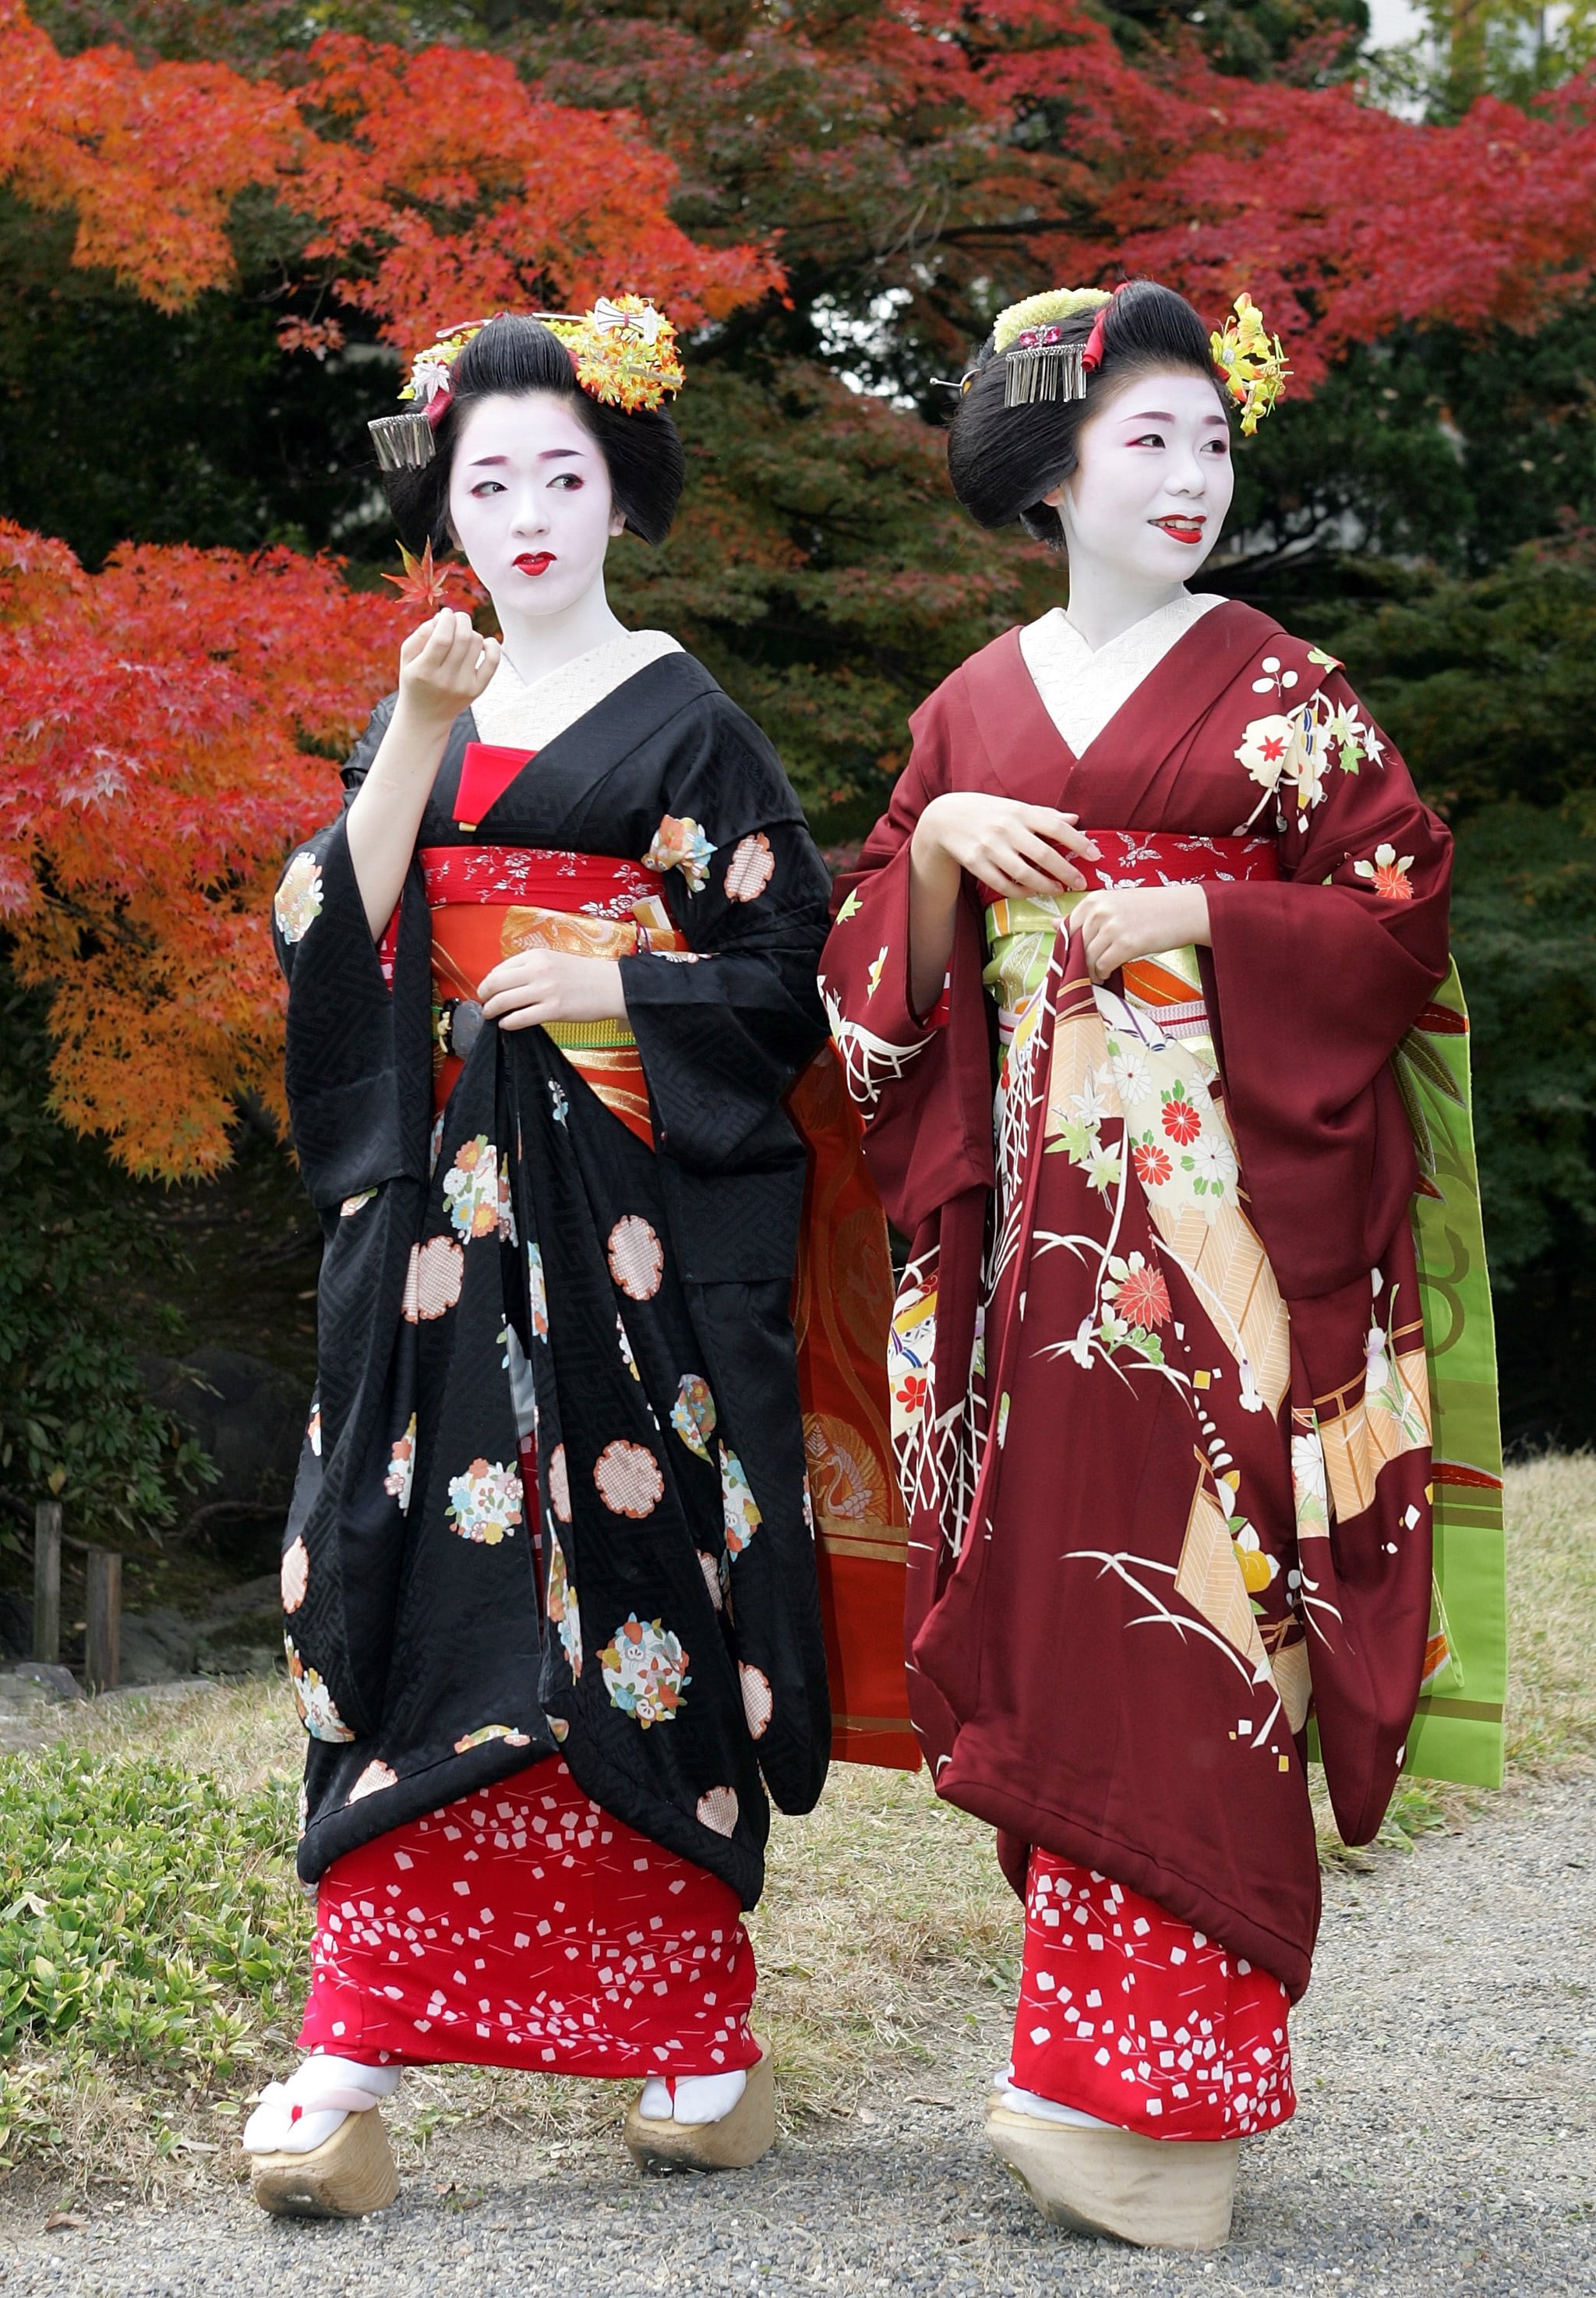 Modern Geishas In Japan — Pretty Tradition Or Outdated